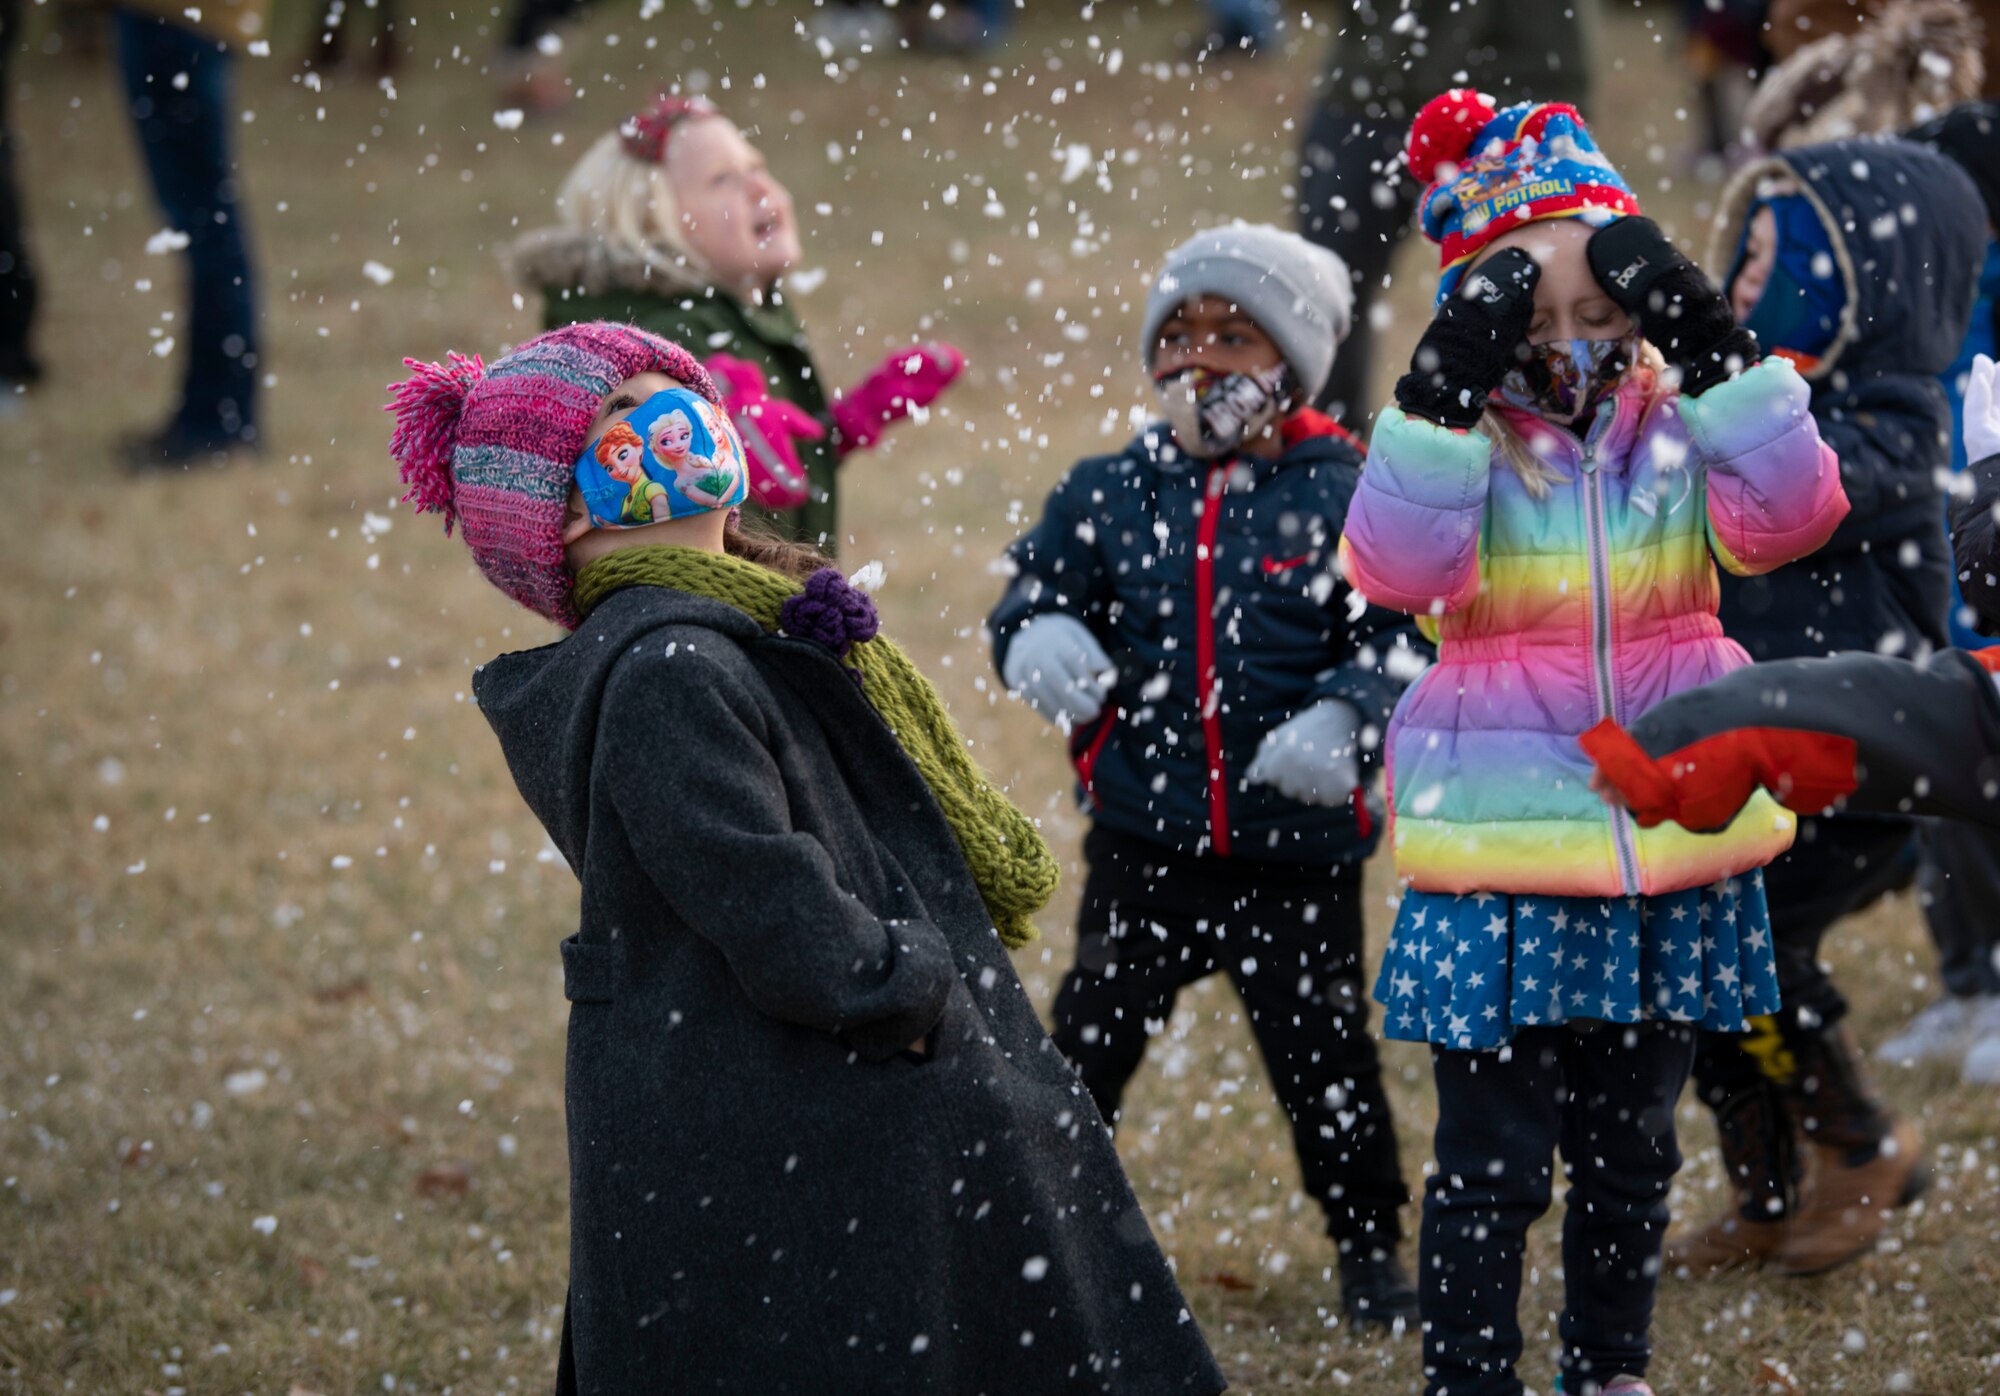 Children play in “snow” at the annual holiday tree lighting event, Dec. 3, 2020, at Altus Air Force Base, Oklahoma. The snow was made of soapsuds that were blown from a snow machine. (U.S. Air Force photo by Airman 1st Class Amanda Lovelace)